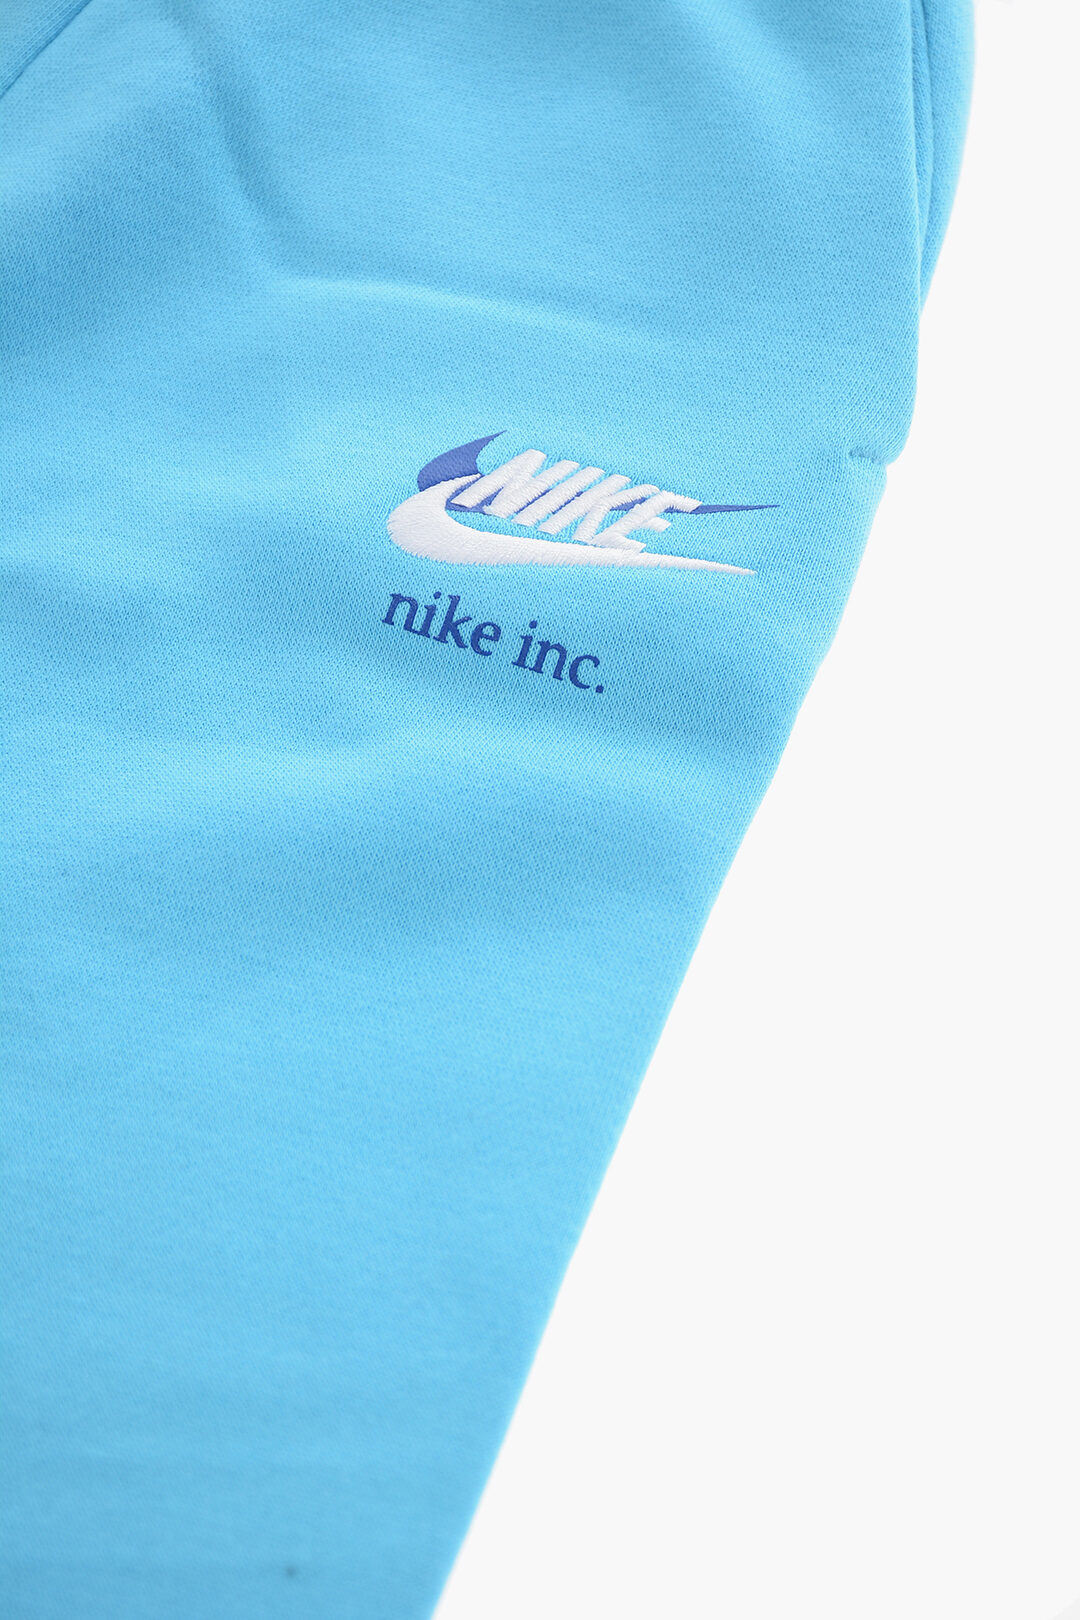 Nike KIDS Fleeced Joggers with Contrasting Print boys - Glamood Outlet